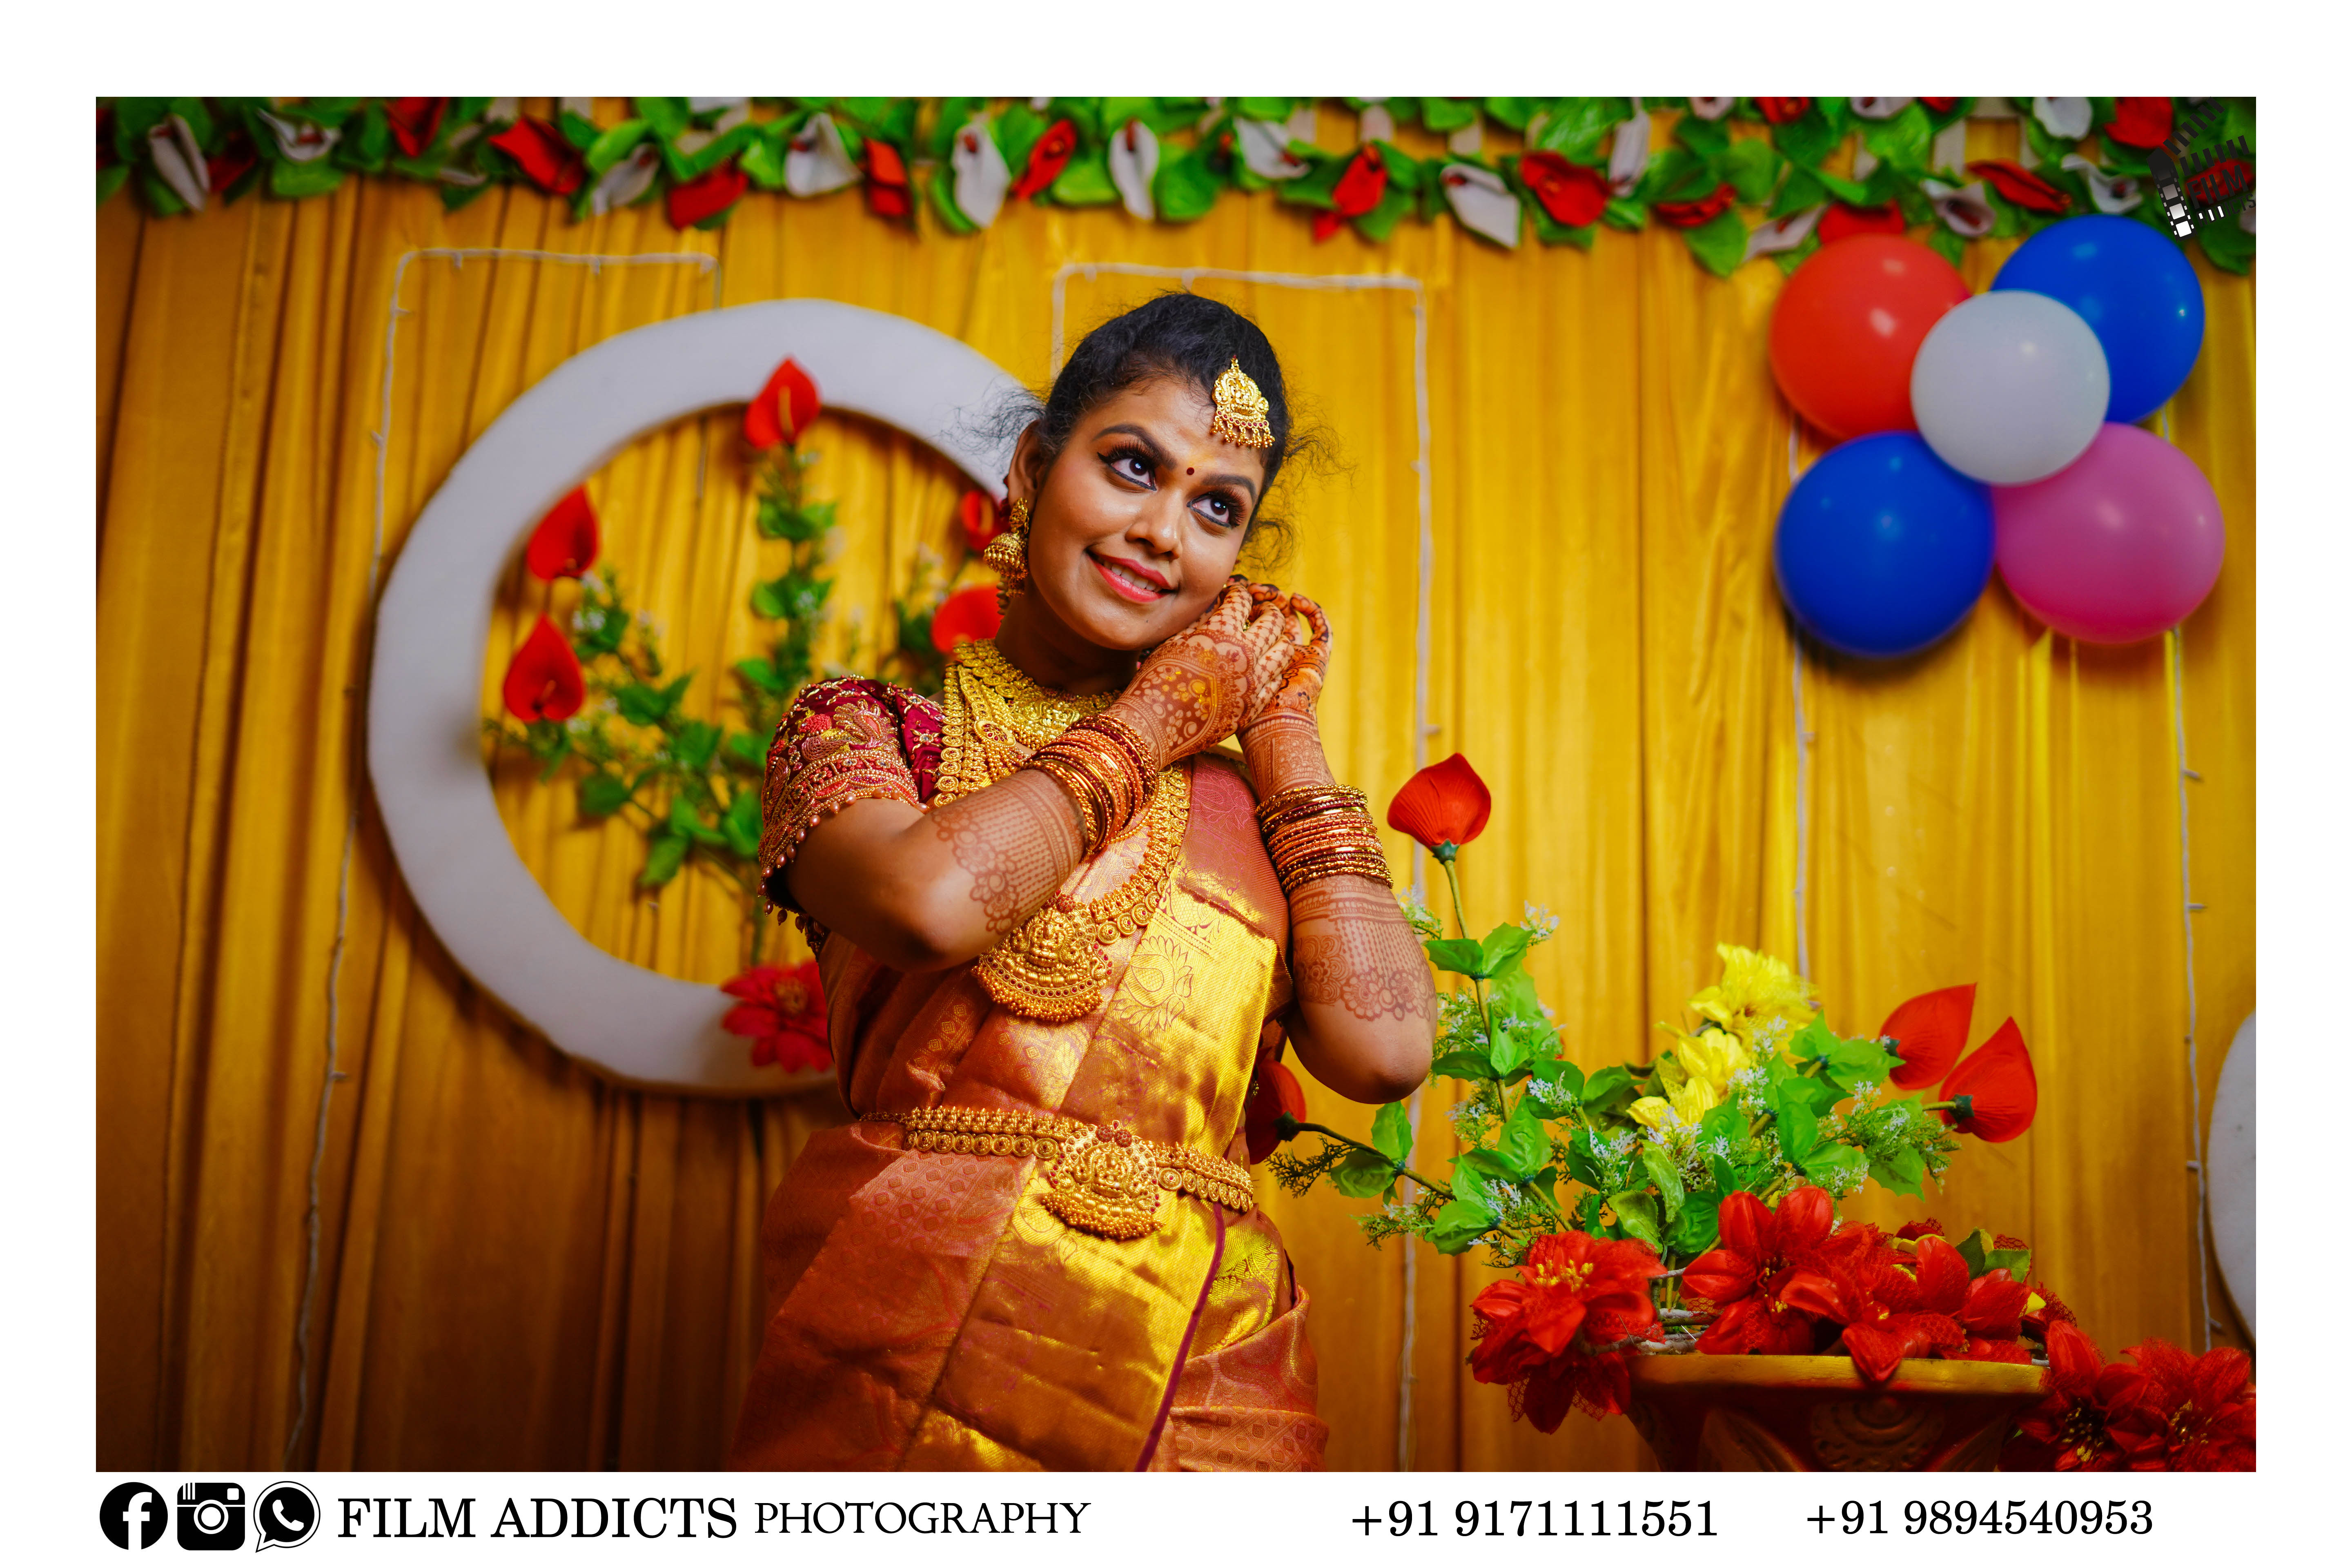 Best Puberty Photography in Virudhunagar-FilmAddicts Photography,Best Wedding Photographers in Virudhunagar, Best candid photographers in Virudhunagar, Best Wedding Candid photographers in Virudhunagar, Wedding Candid Moments, FilmAddicts, Photography, FilmAddictsPhotography, best wedding in Virudhunagar, Best Candid shoot in Virudhunagar, best moment, Best wedding moments, Best wedding photography in Virudhunagar, Best wedding videography in Virudhunagar, Best couple shoot, Best candid, Best wedding shoot, Best wedding candid, best marraige photographers in Virudhunagar, best marraige photography in Virudhunagar, best candid photography, best Virudhunagar photography, Virudhunagar, Virudhunagar photography, Virudhunagar couples, candid shoot, candid, tamilnadu wedding photography, best photographers in Virudhunagar, tamilnadu